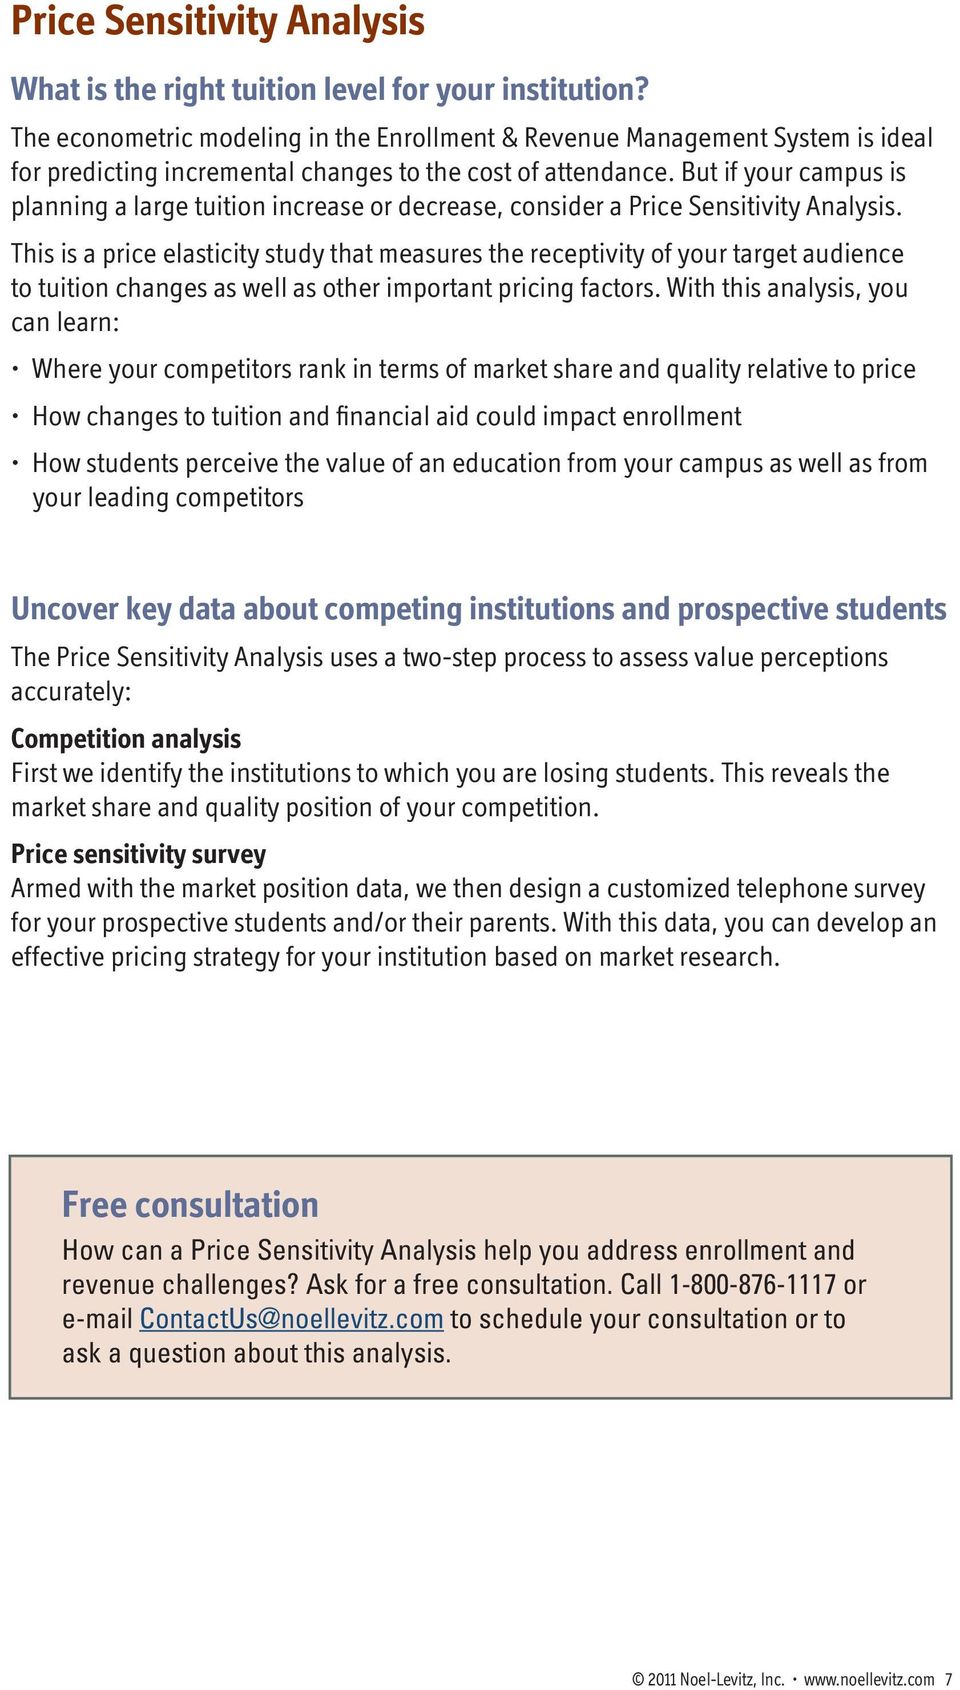 But if your campus is planning a large tuition increase or decrease, consider a Price Sensitivity Analysis.